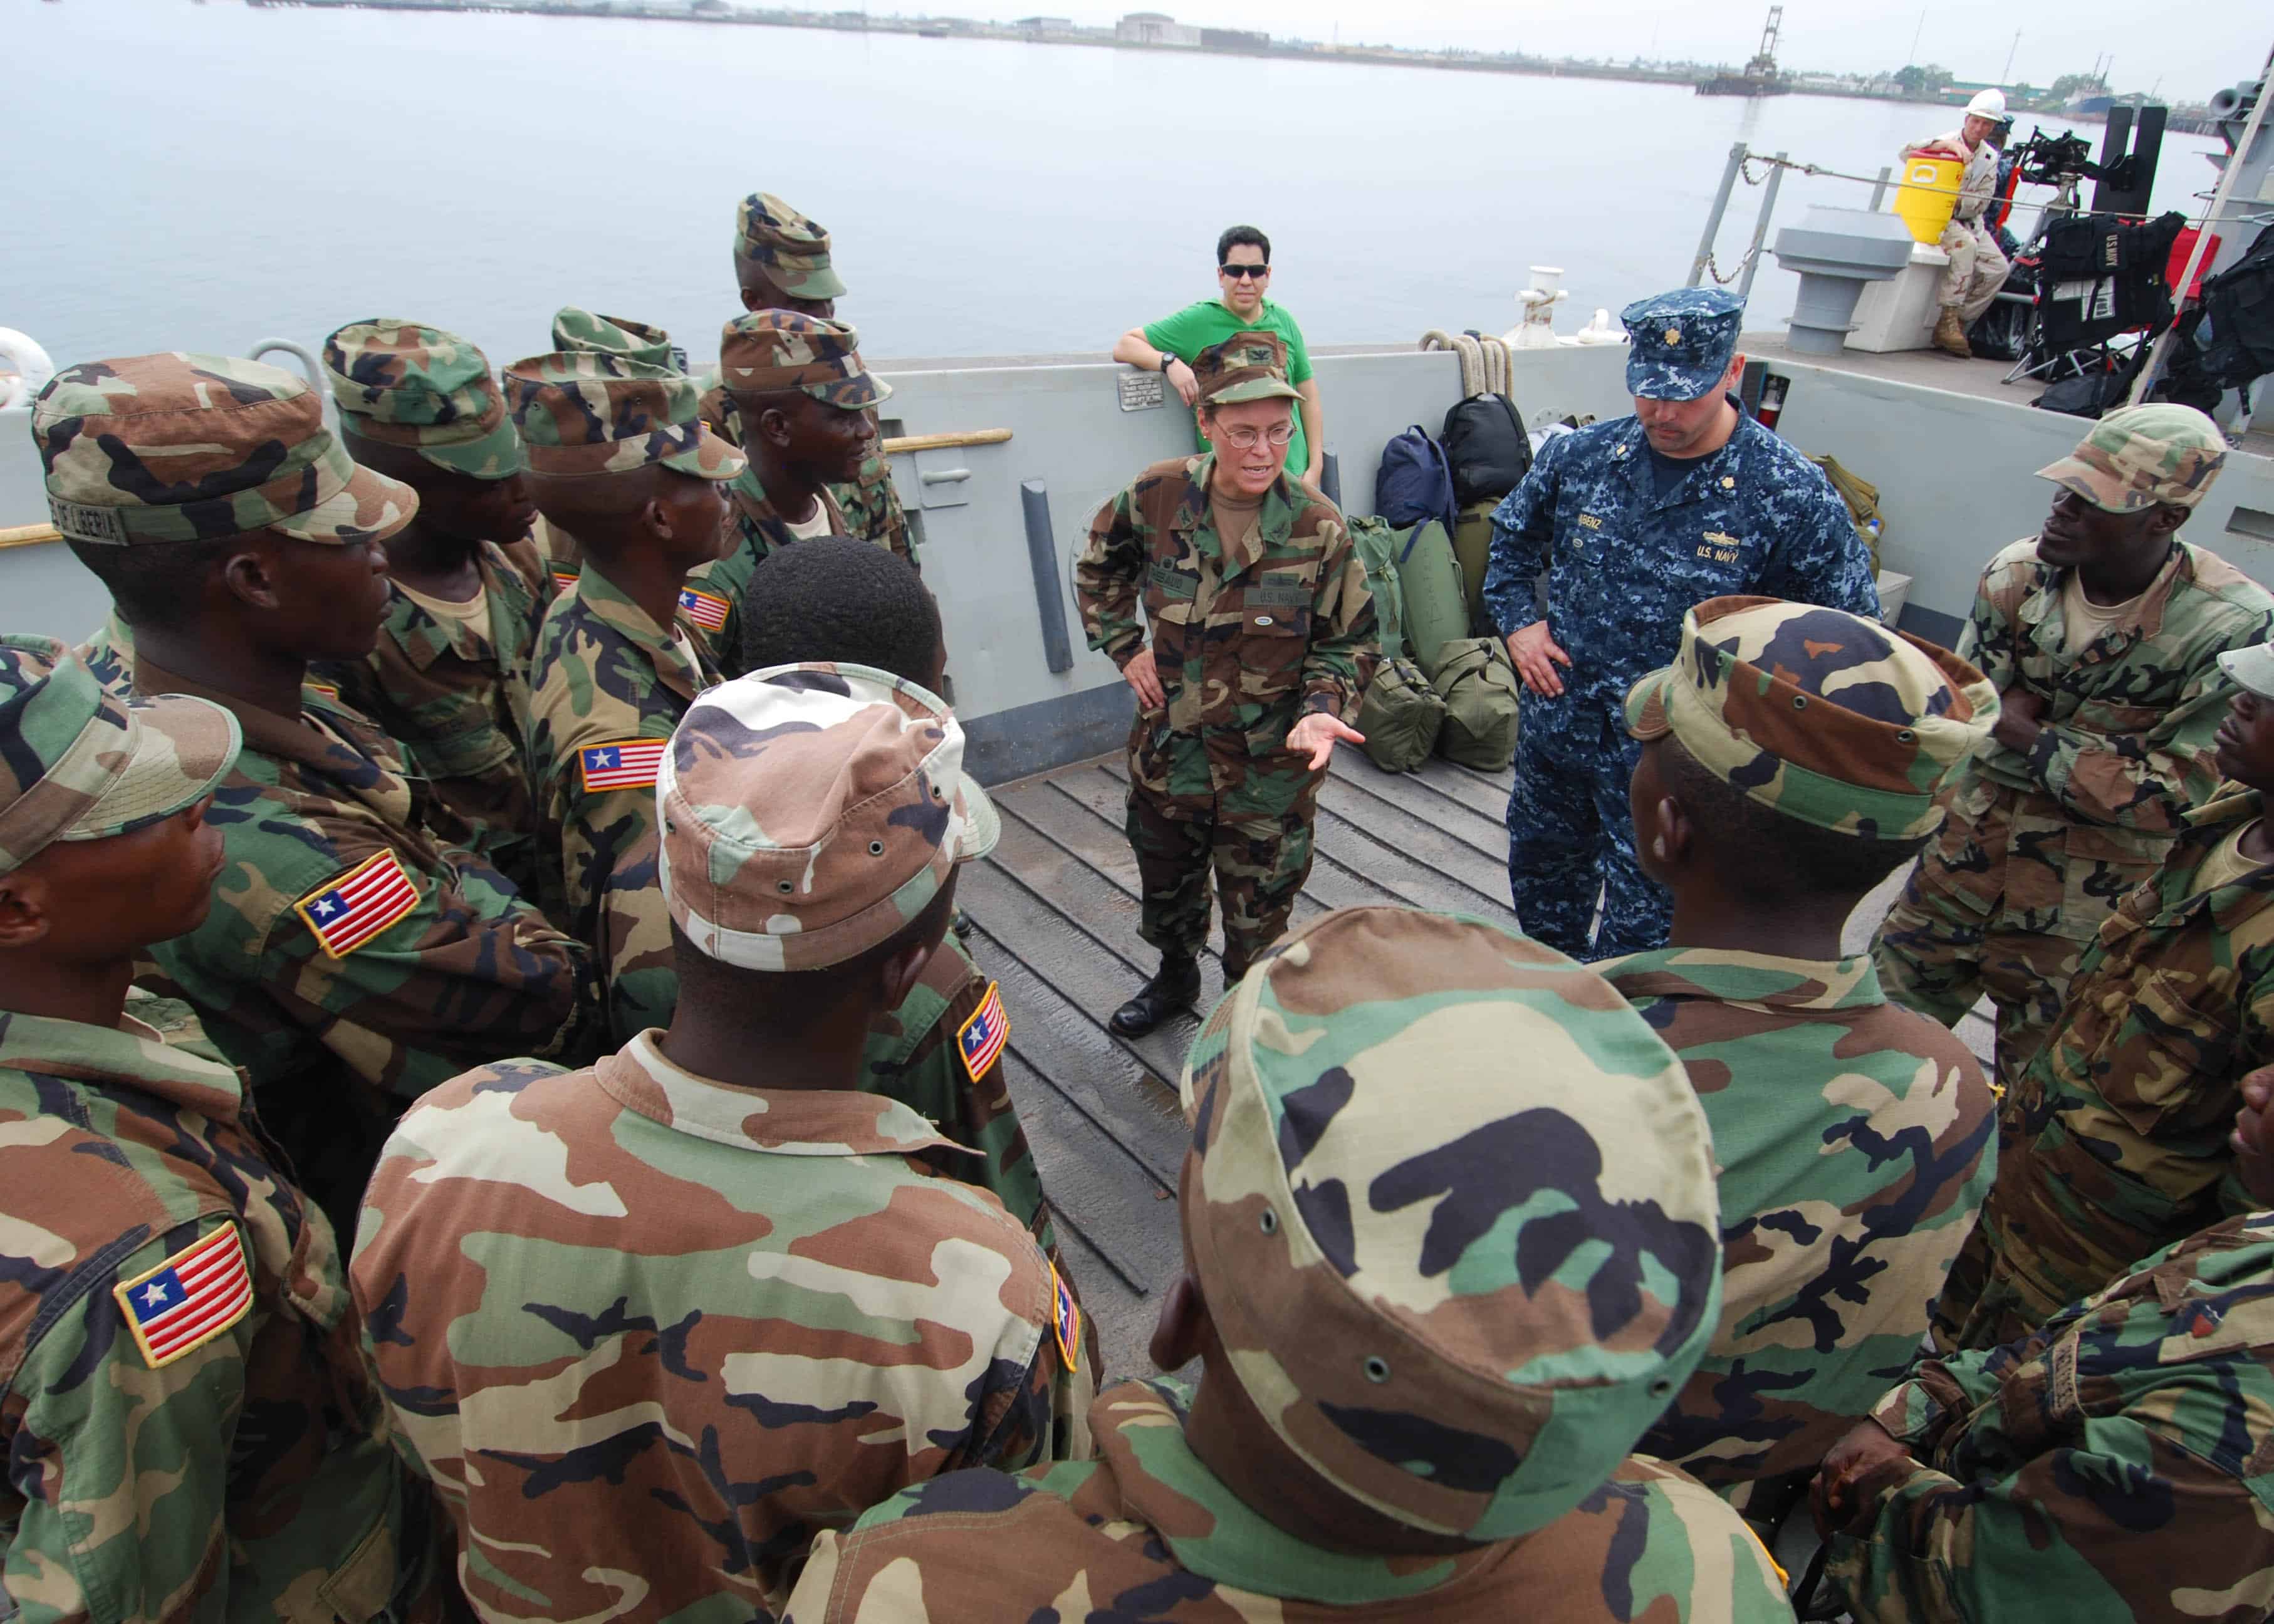 African Partnership Station West Commander, Capt. Cindy Thebaud, and APS Operations Officer, Lt. Cmdr. Timothy Labenz, speak to a group of 17 Armed Forces of Liberia Coast Guardsman while transiting to the Whidbey Island-class amphibious dock-landing ship USS Gunston Hall.